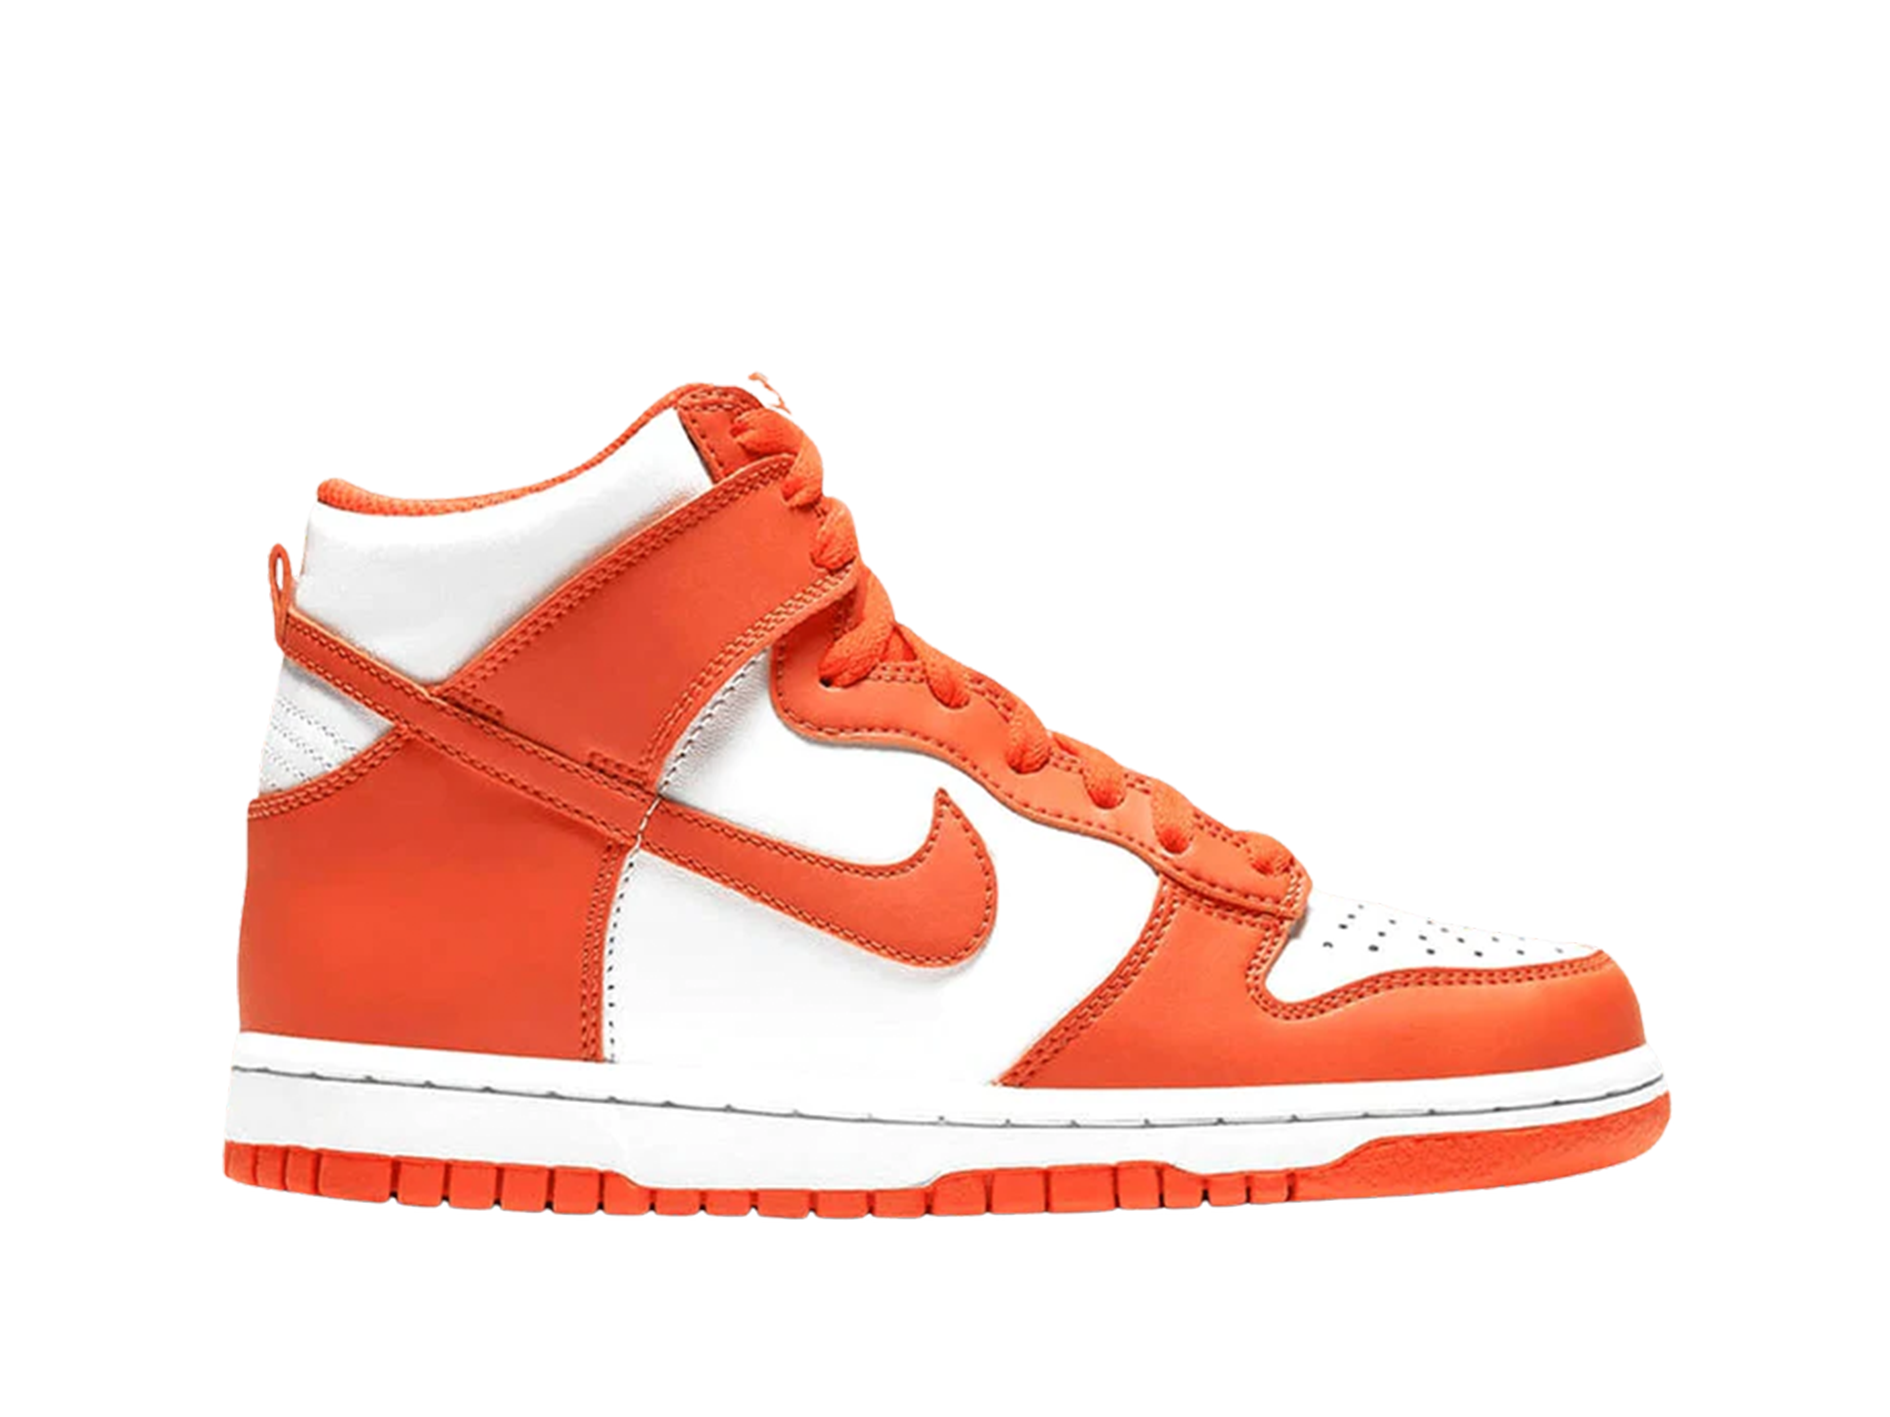 Double Boxed  199.99 Nike Dunk High Syracuse (GS) Double Boxed